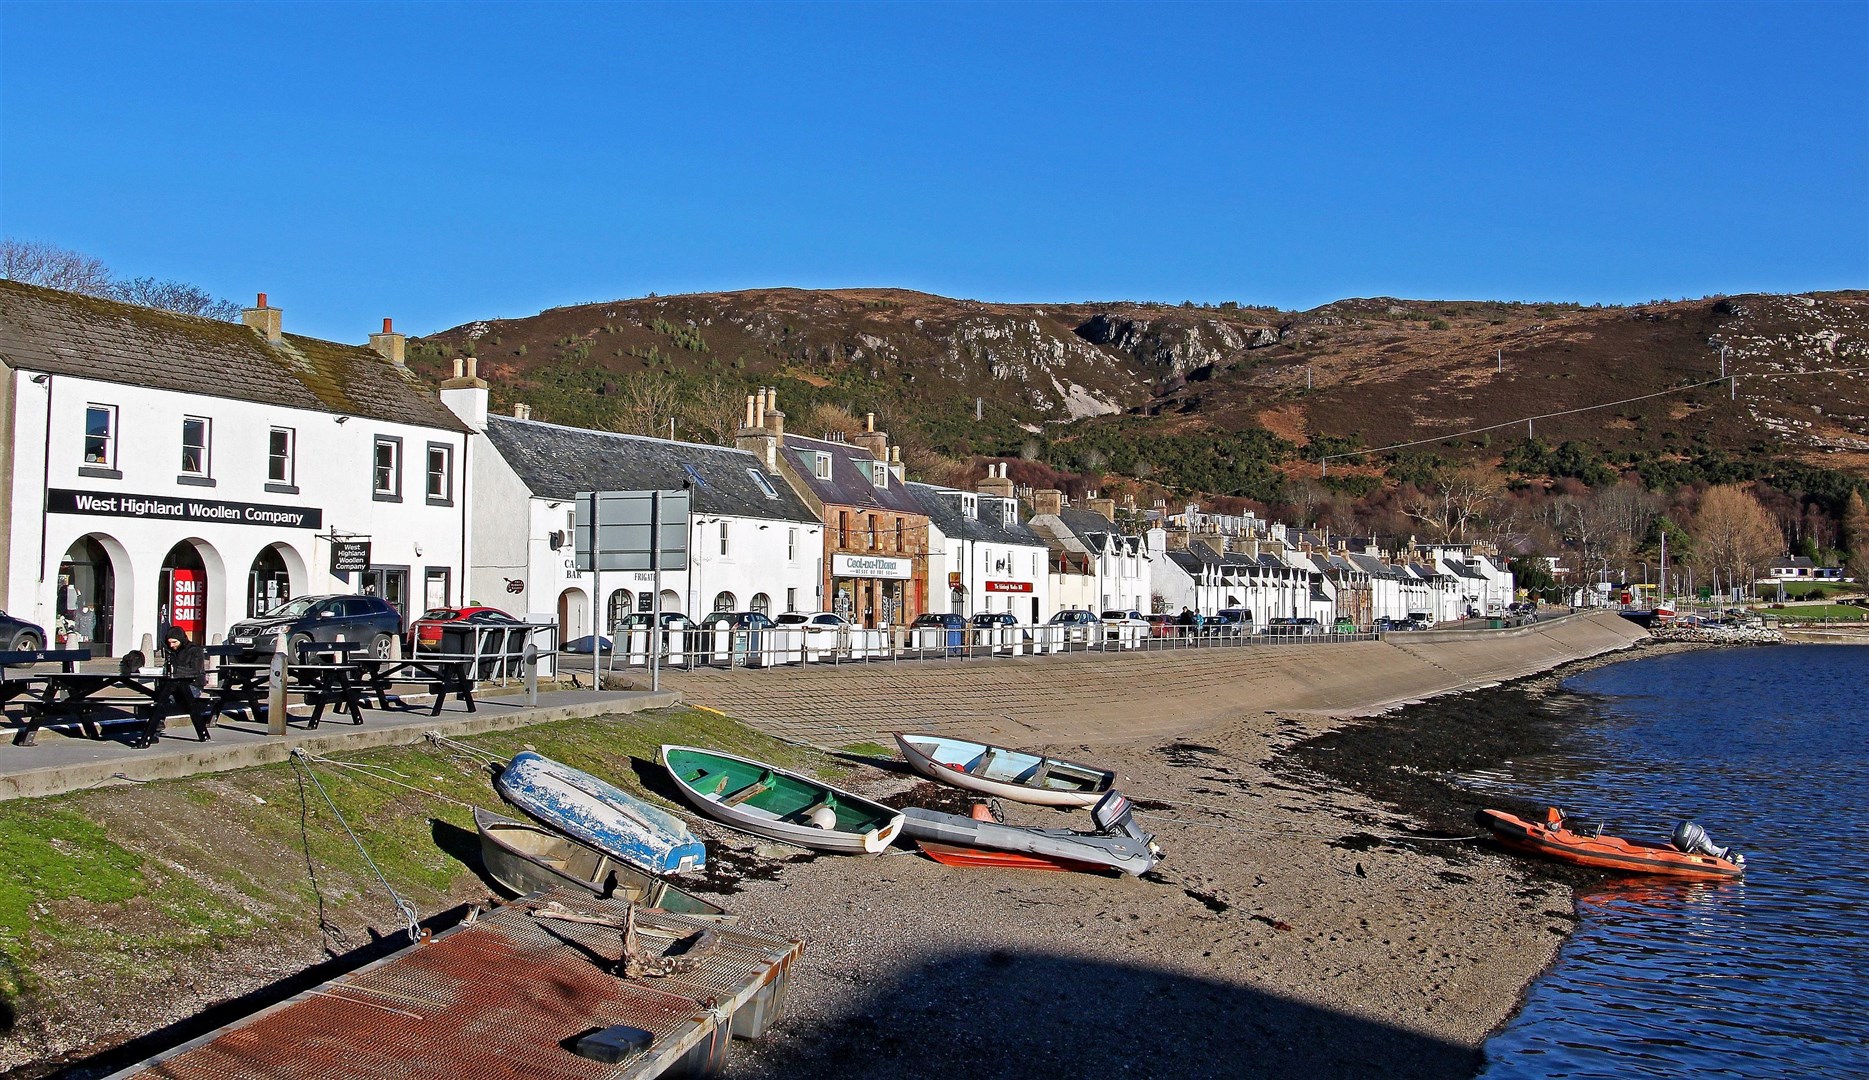 Plans are being drawn up for a new sign welcoming visitors to Ullapool.